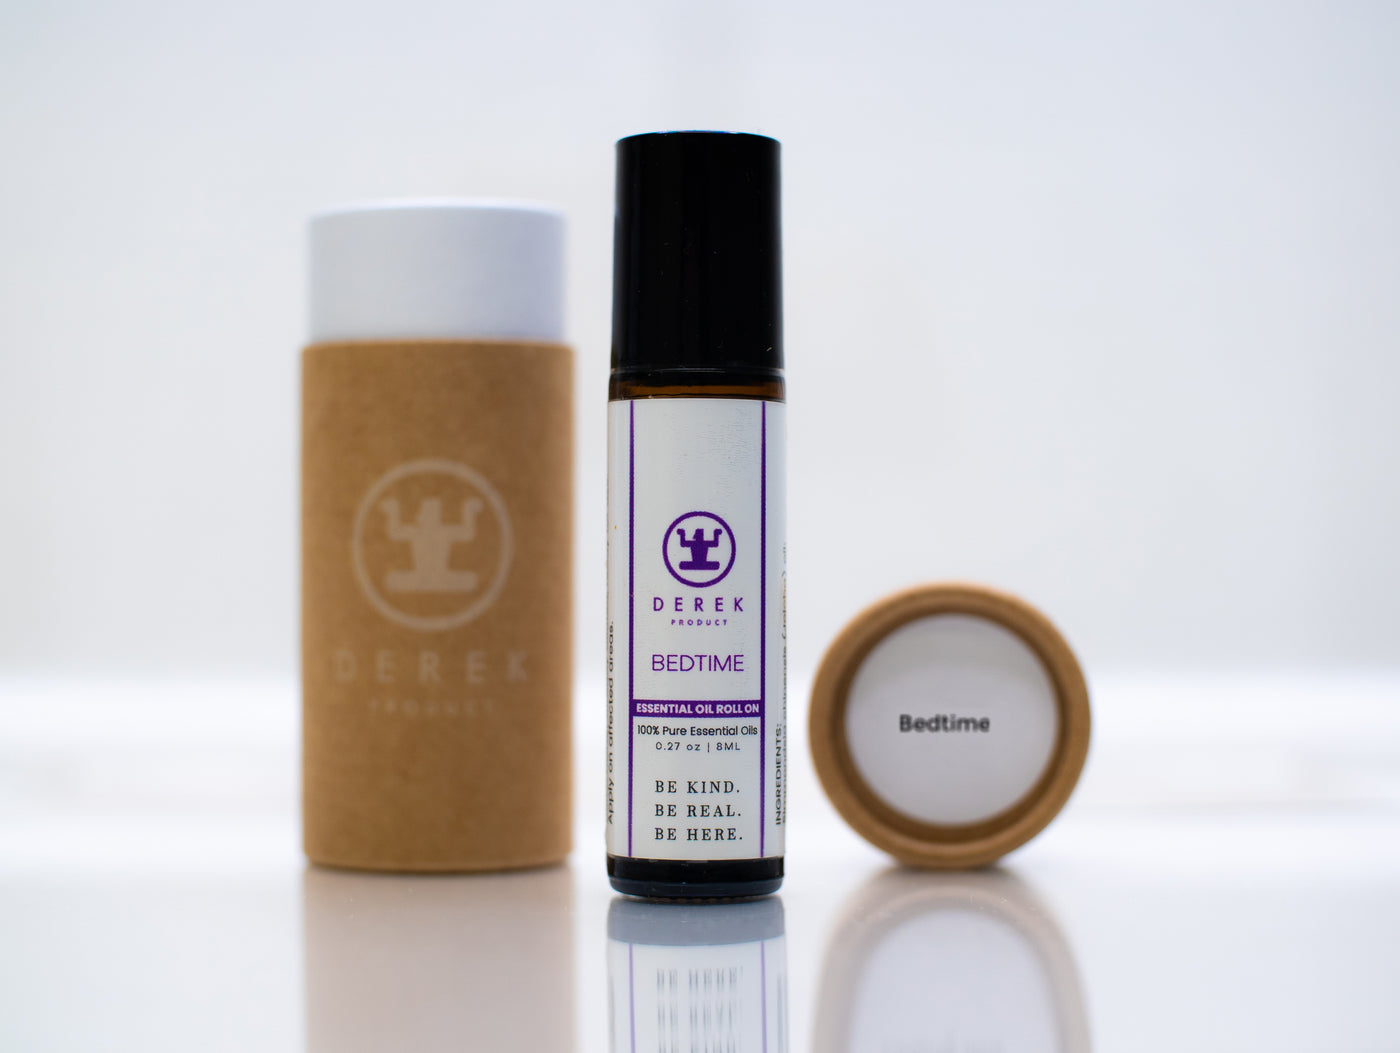 Derek Product- Bedtime Essential Oil Roll On for Aromatherapy and Relaxation | Soothing Blend | 8ML - DerekProduct